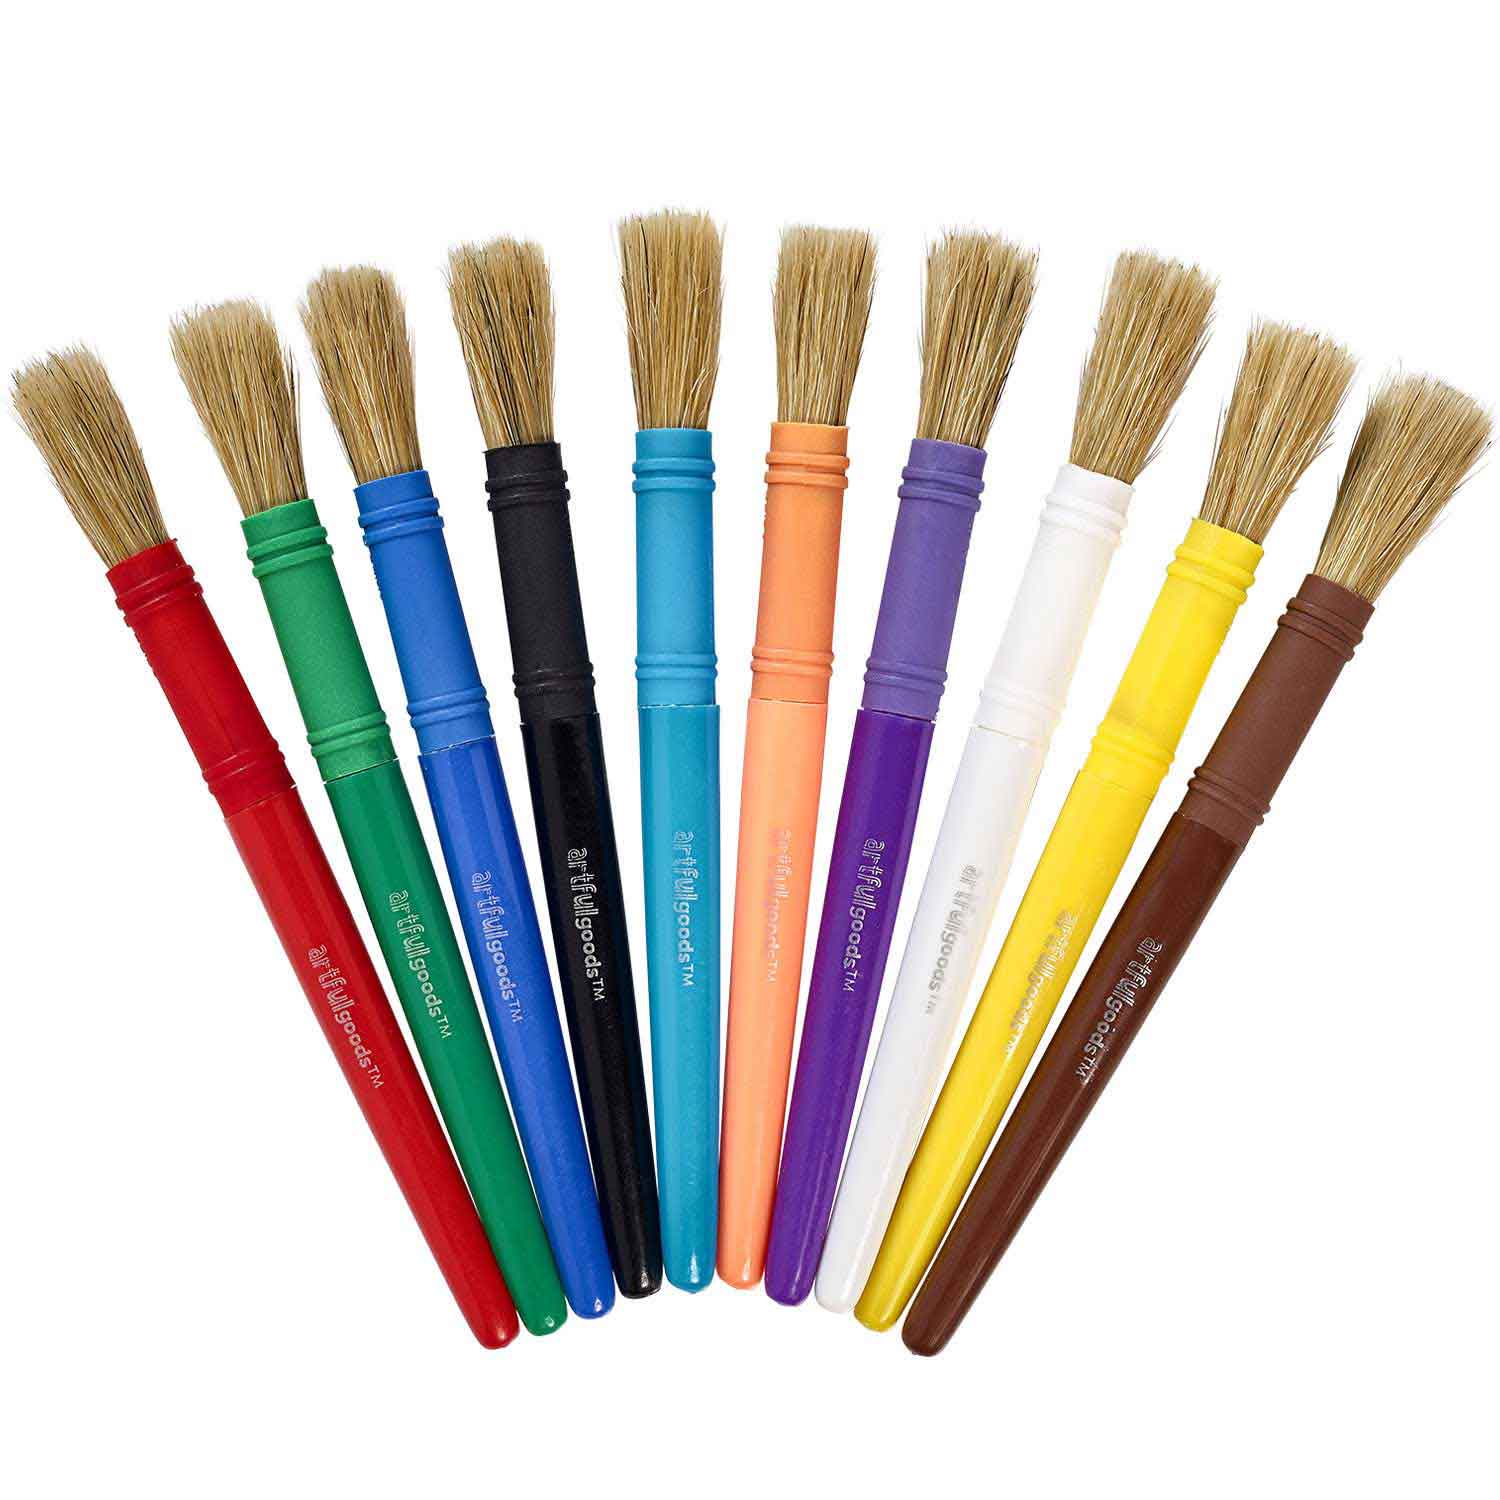 Fabric Paint - Set of 4 at Lakeshore Learning